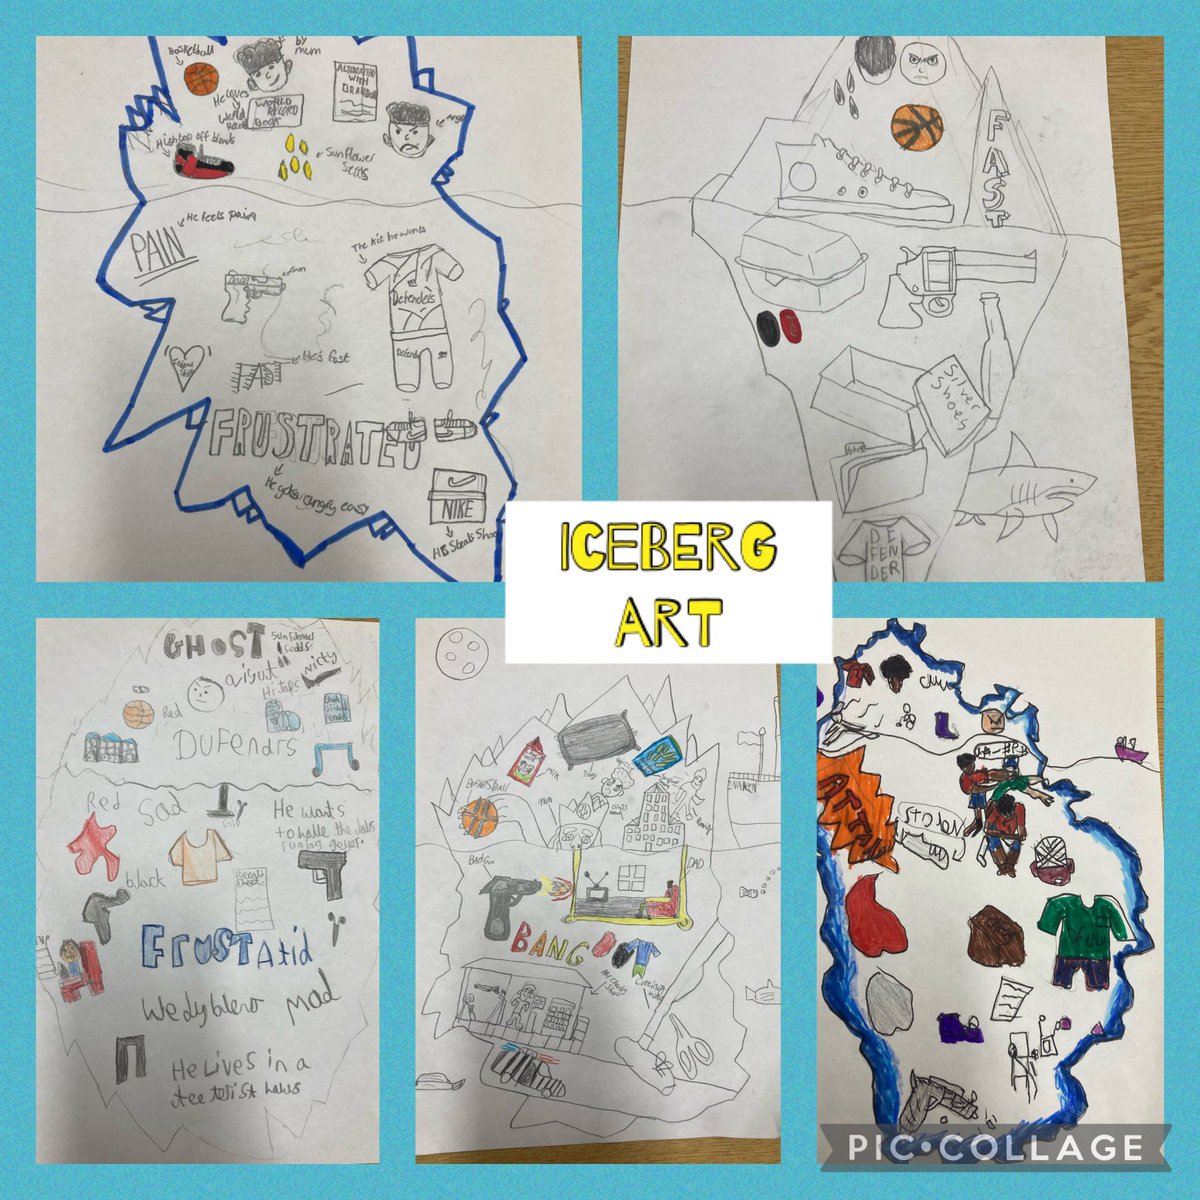 Blwyddyn 6 have been developing their #empathy and creative skills to create iceberg art - representing the character of Ghost #EnterprisingCreativeContributors